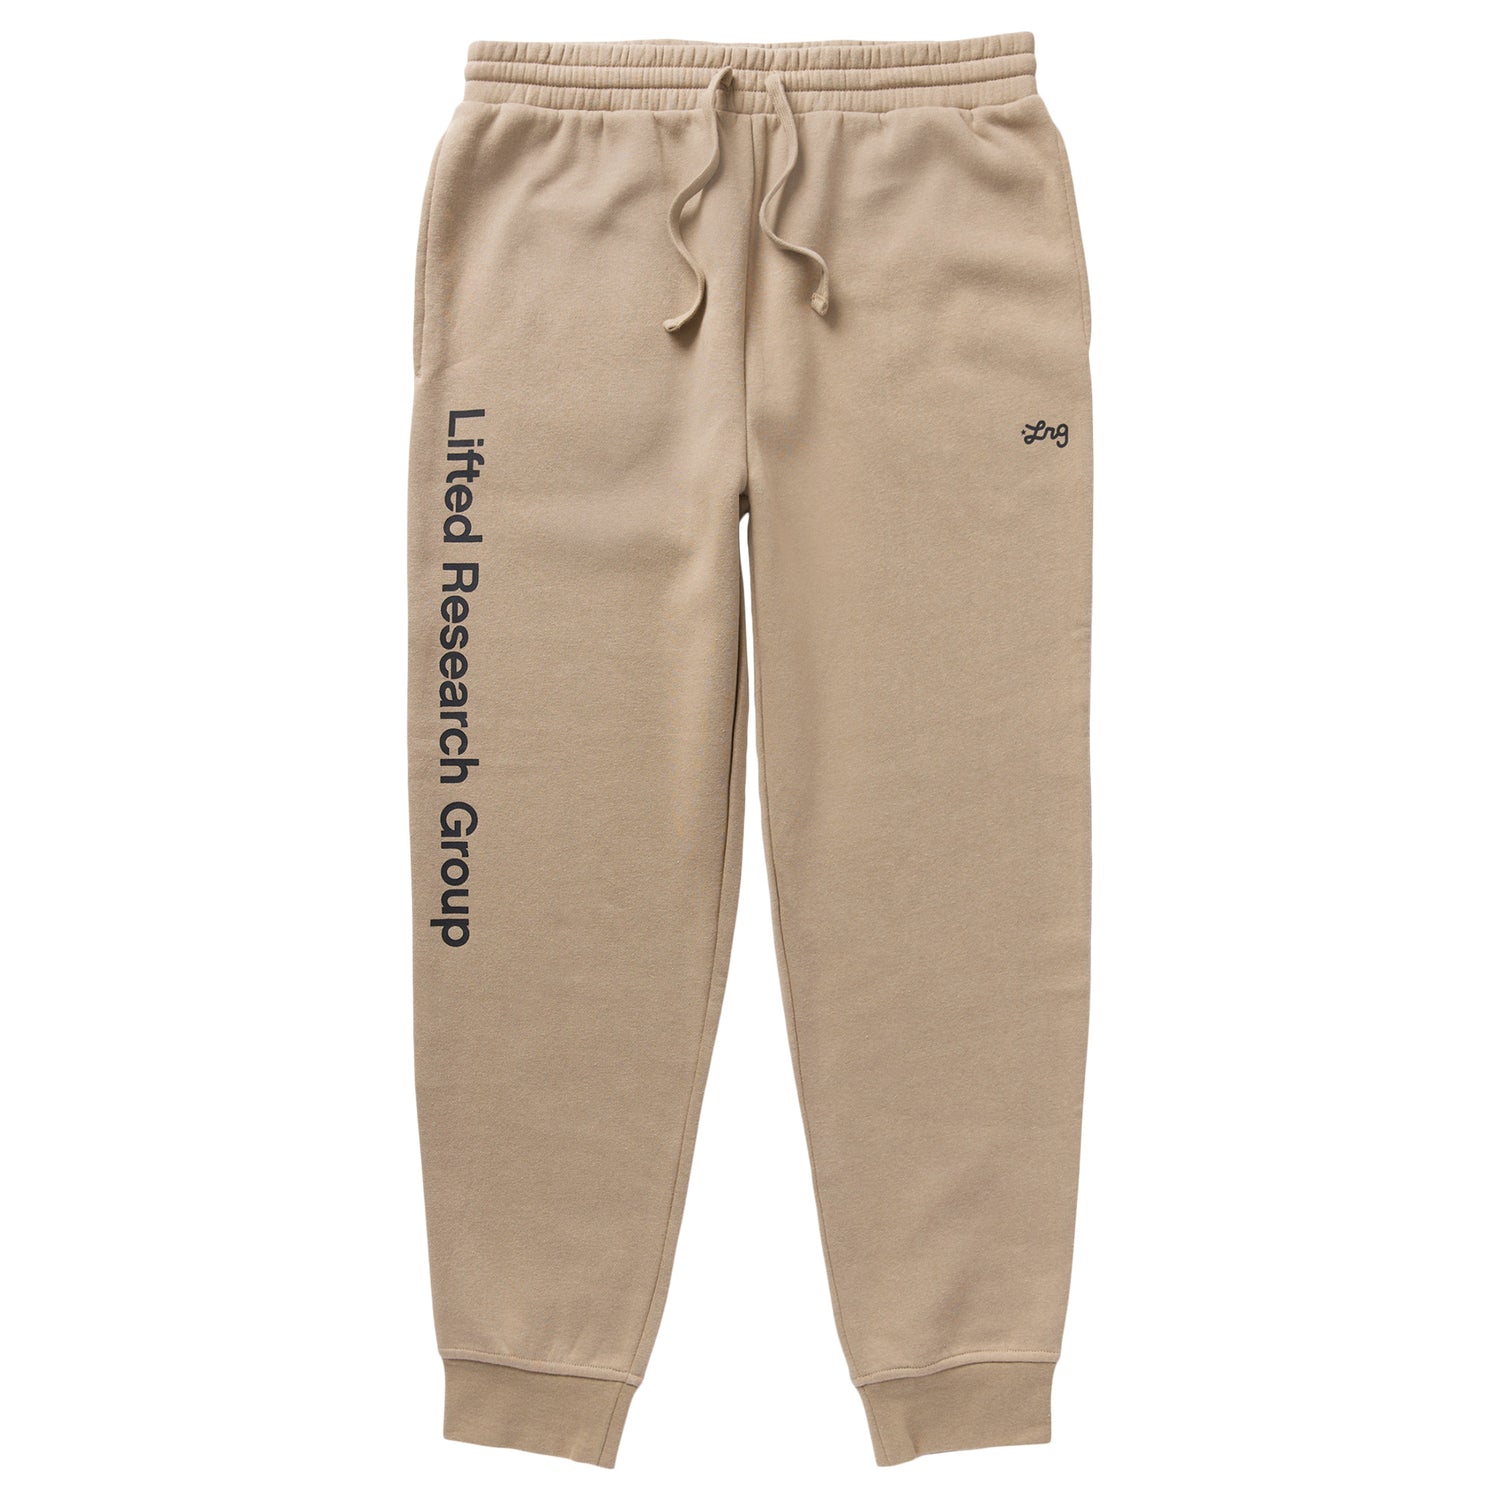 SOMEPLACE - Wide one tuck sweat string banding jogger pants - Codibook.